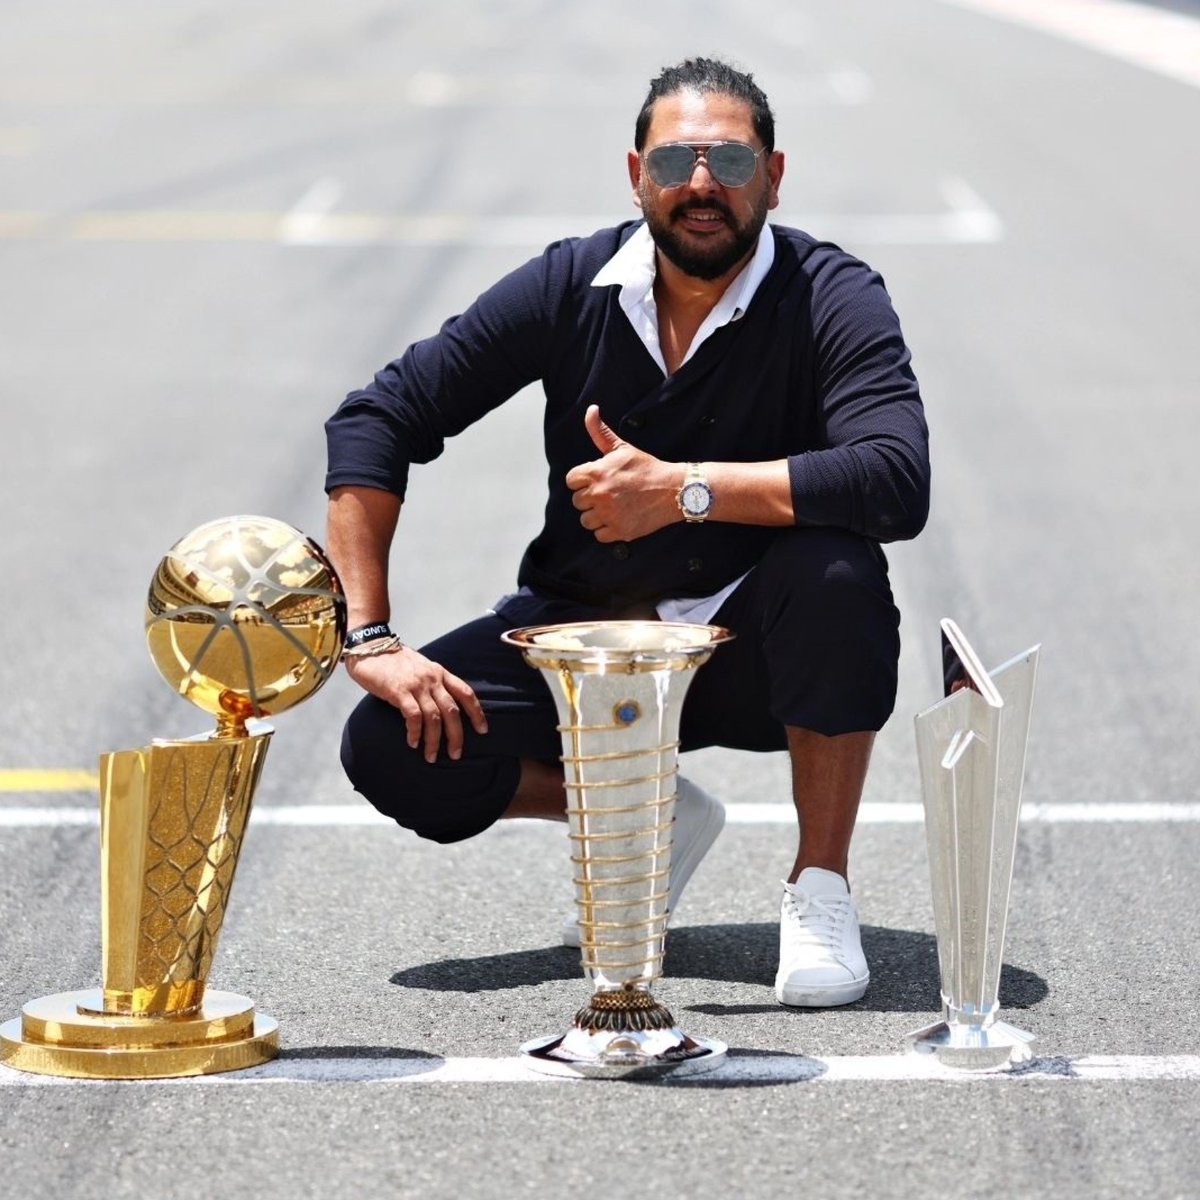 .@YUVSTRONG12 zoomed into the Formula One Miami Grand Prix in style, posing with the NBA, F1 Driver Championship and T20 World Cup trophies.  

Read more here: telegraphindia.com/my-kolkata/try…  

#TryThisToday #MKRecommends #YuvrajSingh #FormulaOne #F1 #MensWorldCup #Cricket